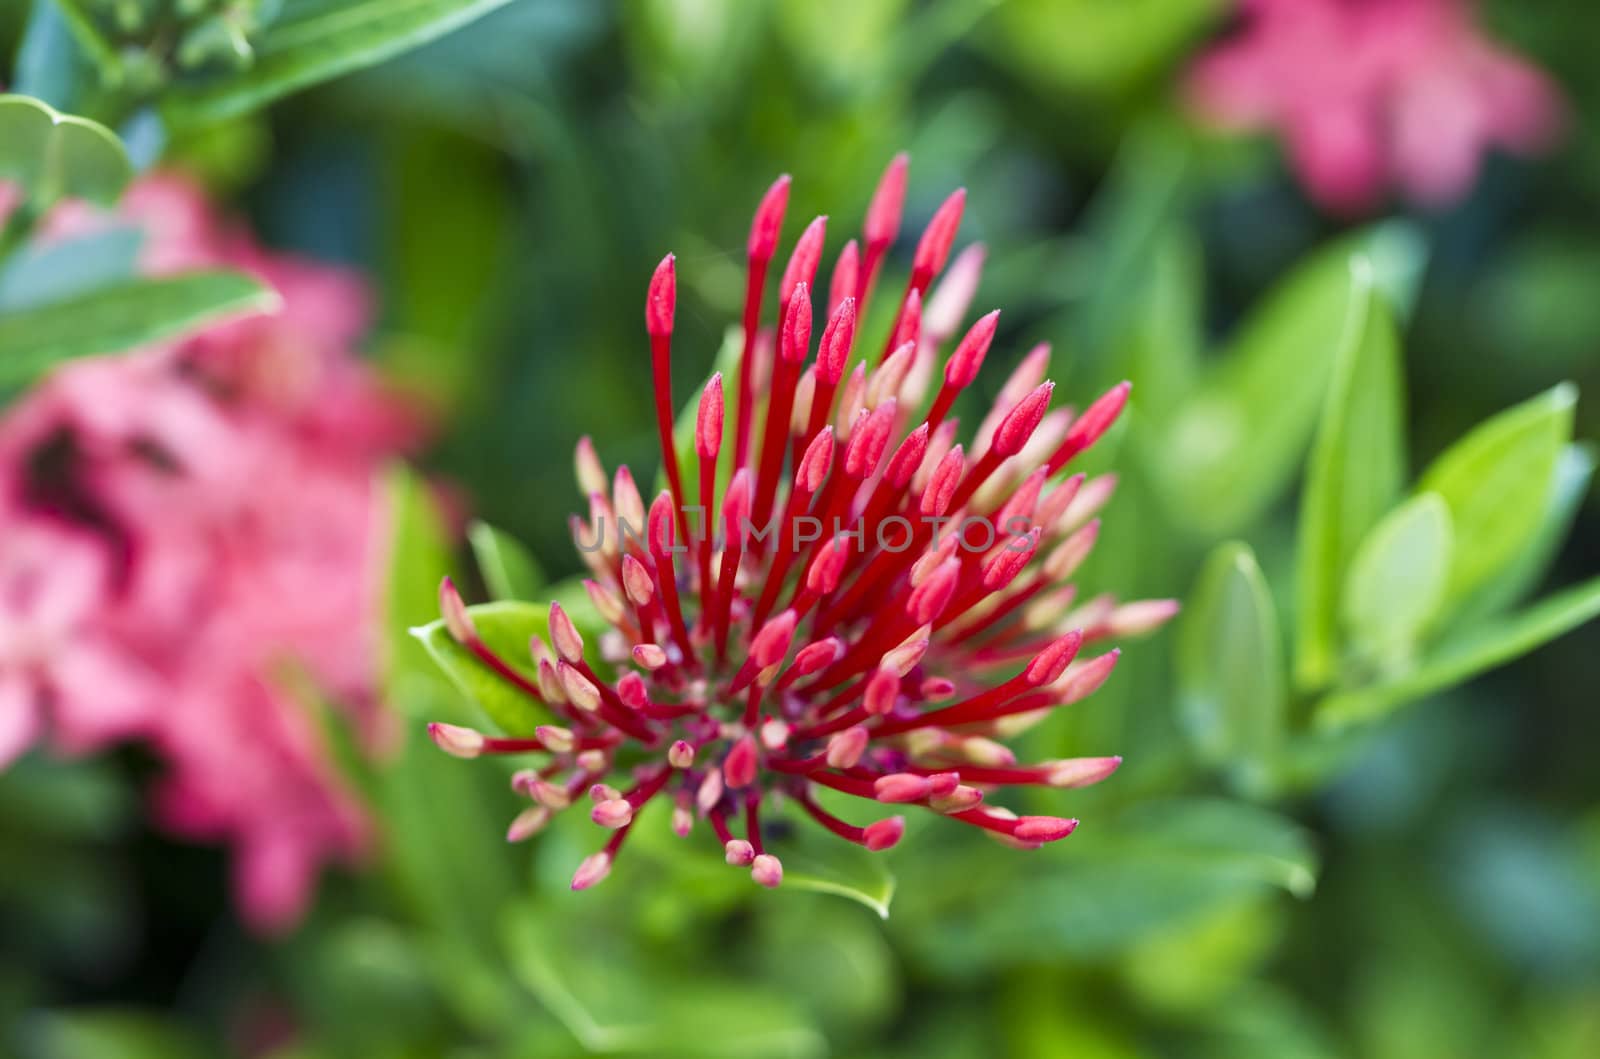 Red Ixora flower buds in the morning light with green blurry background